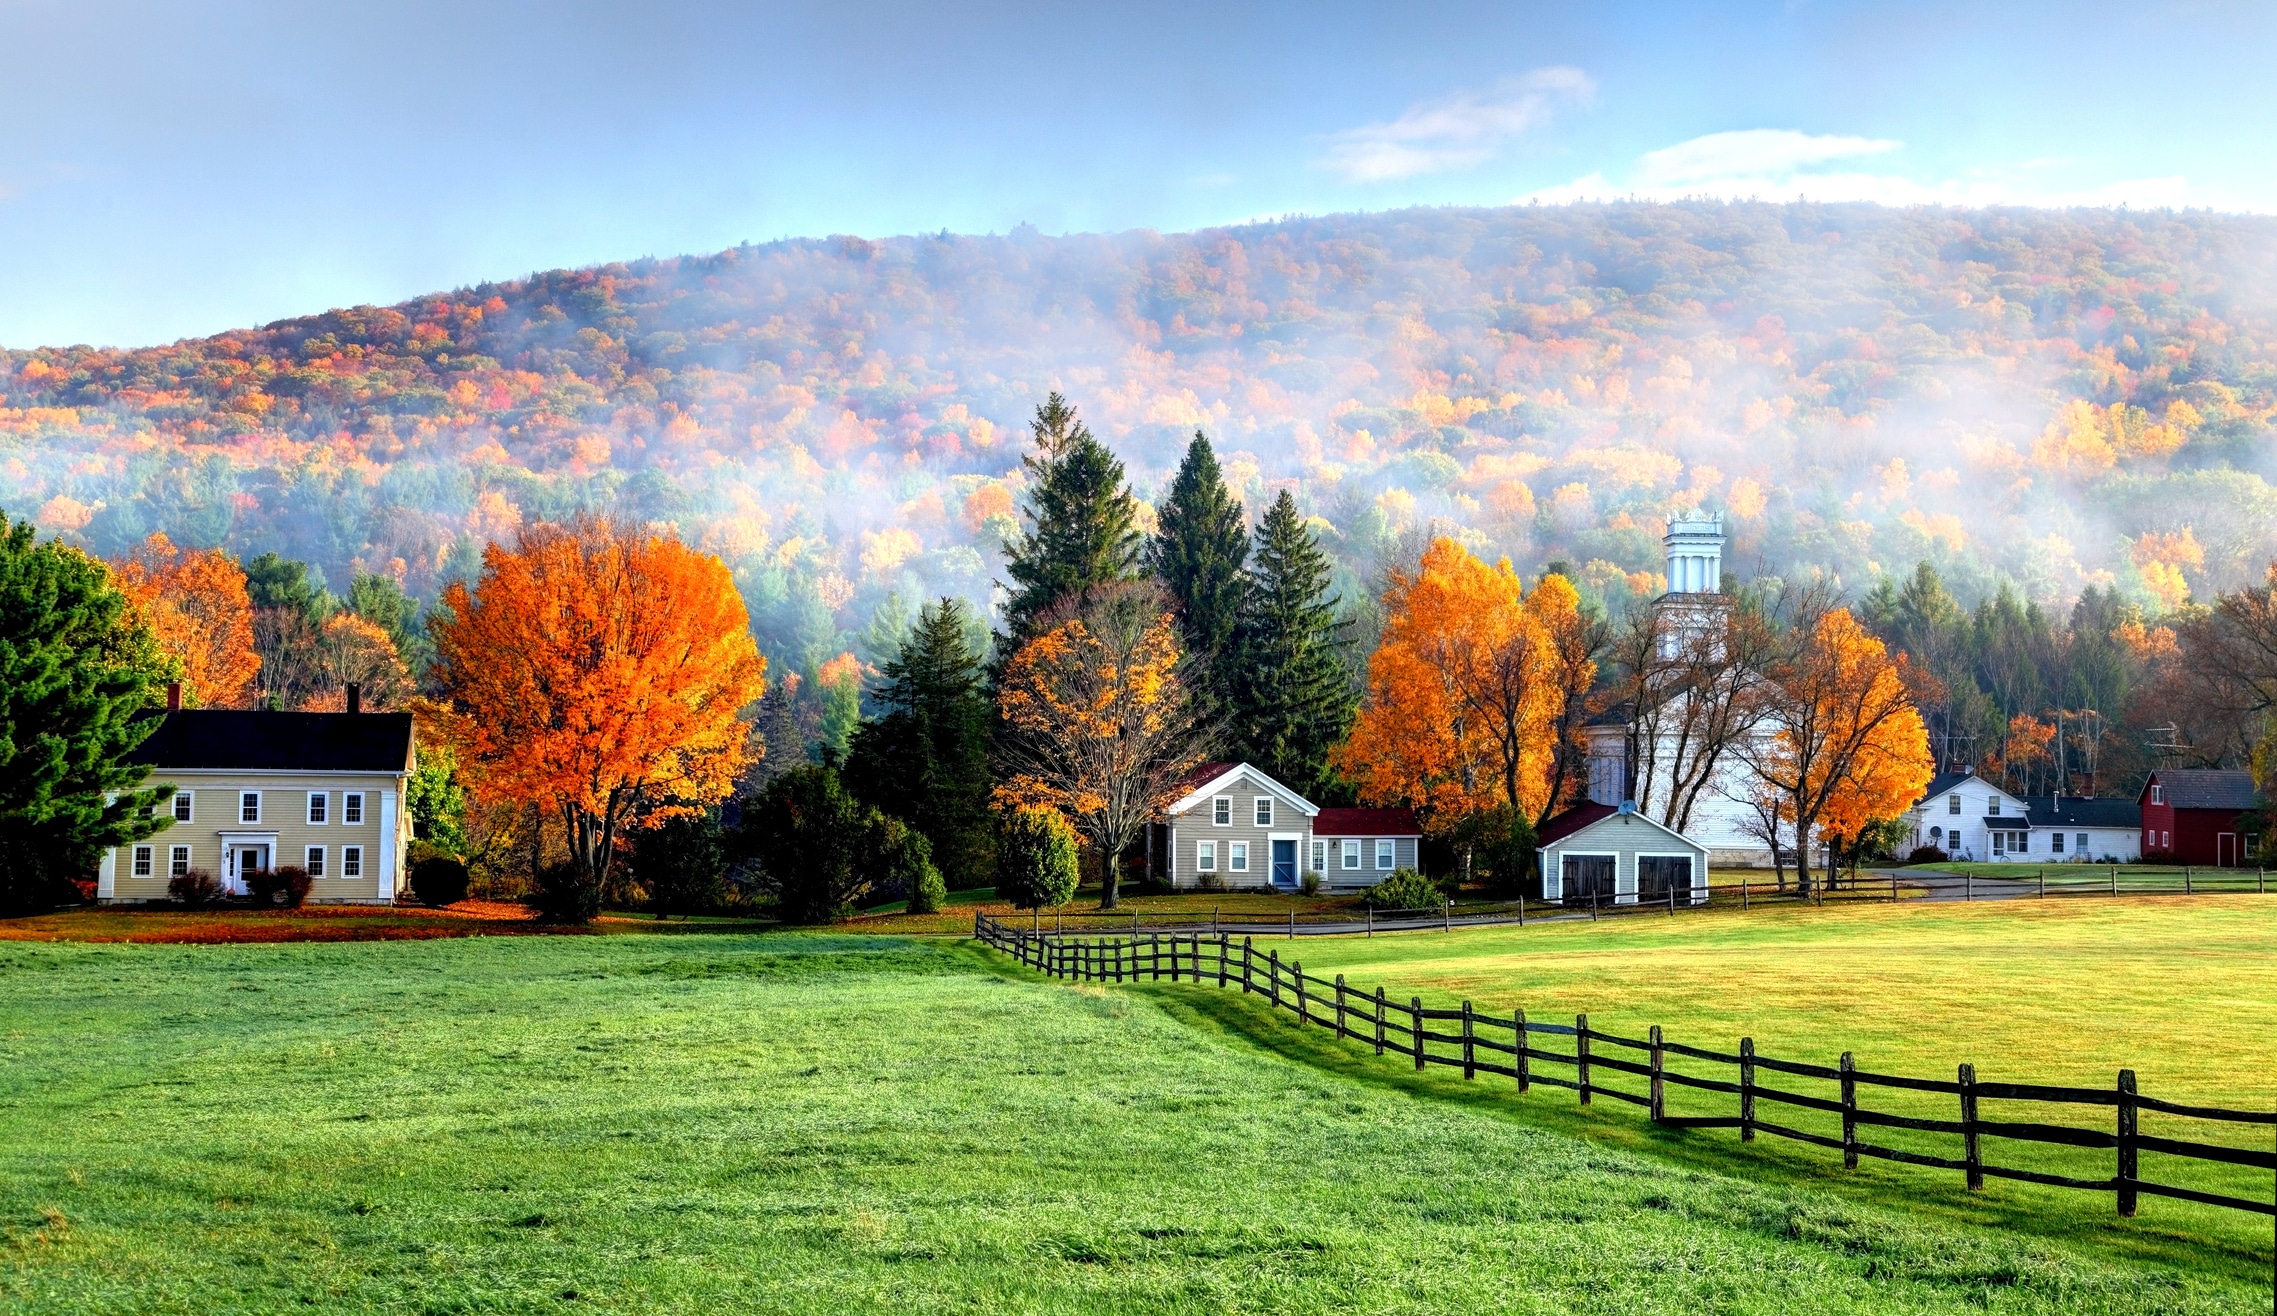 Autumn mist in the village of Tyringham in the Berkshires